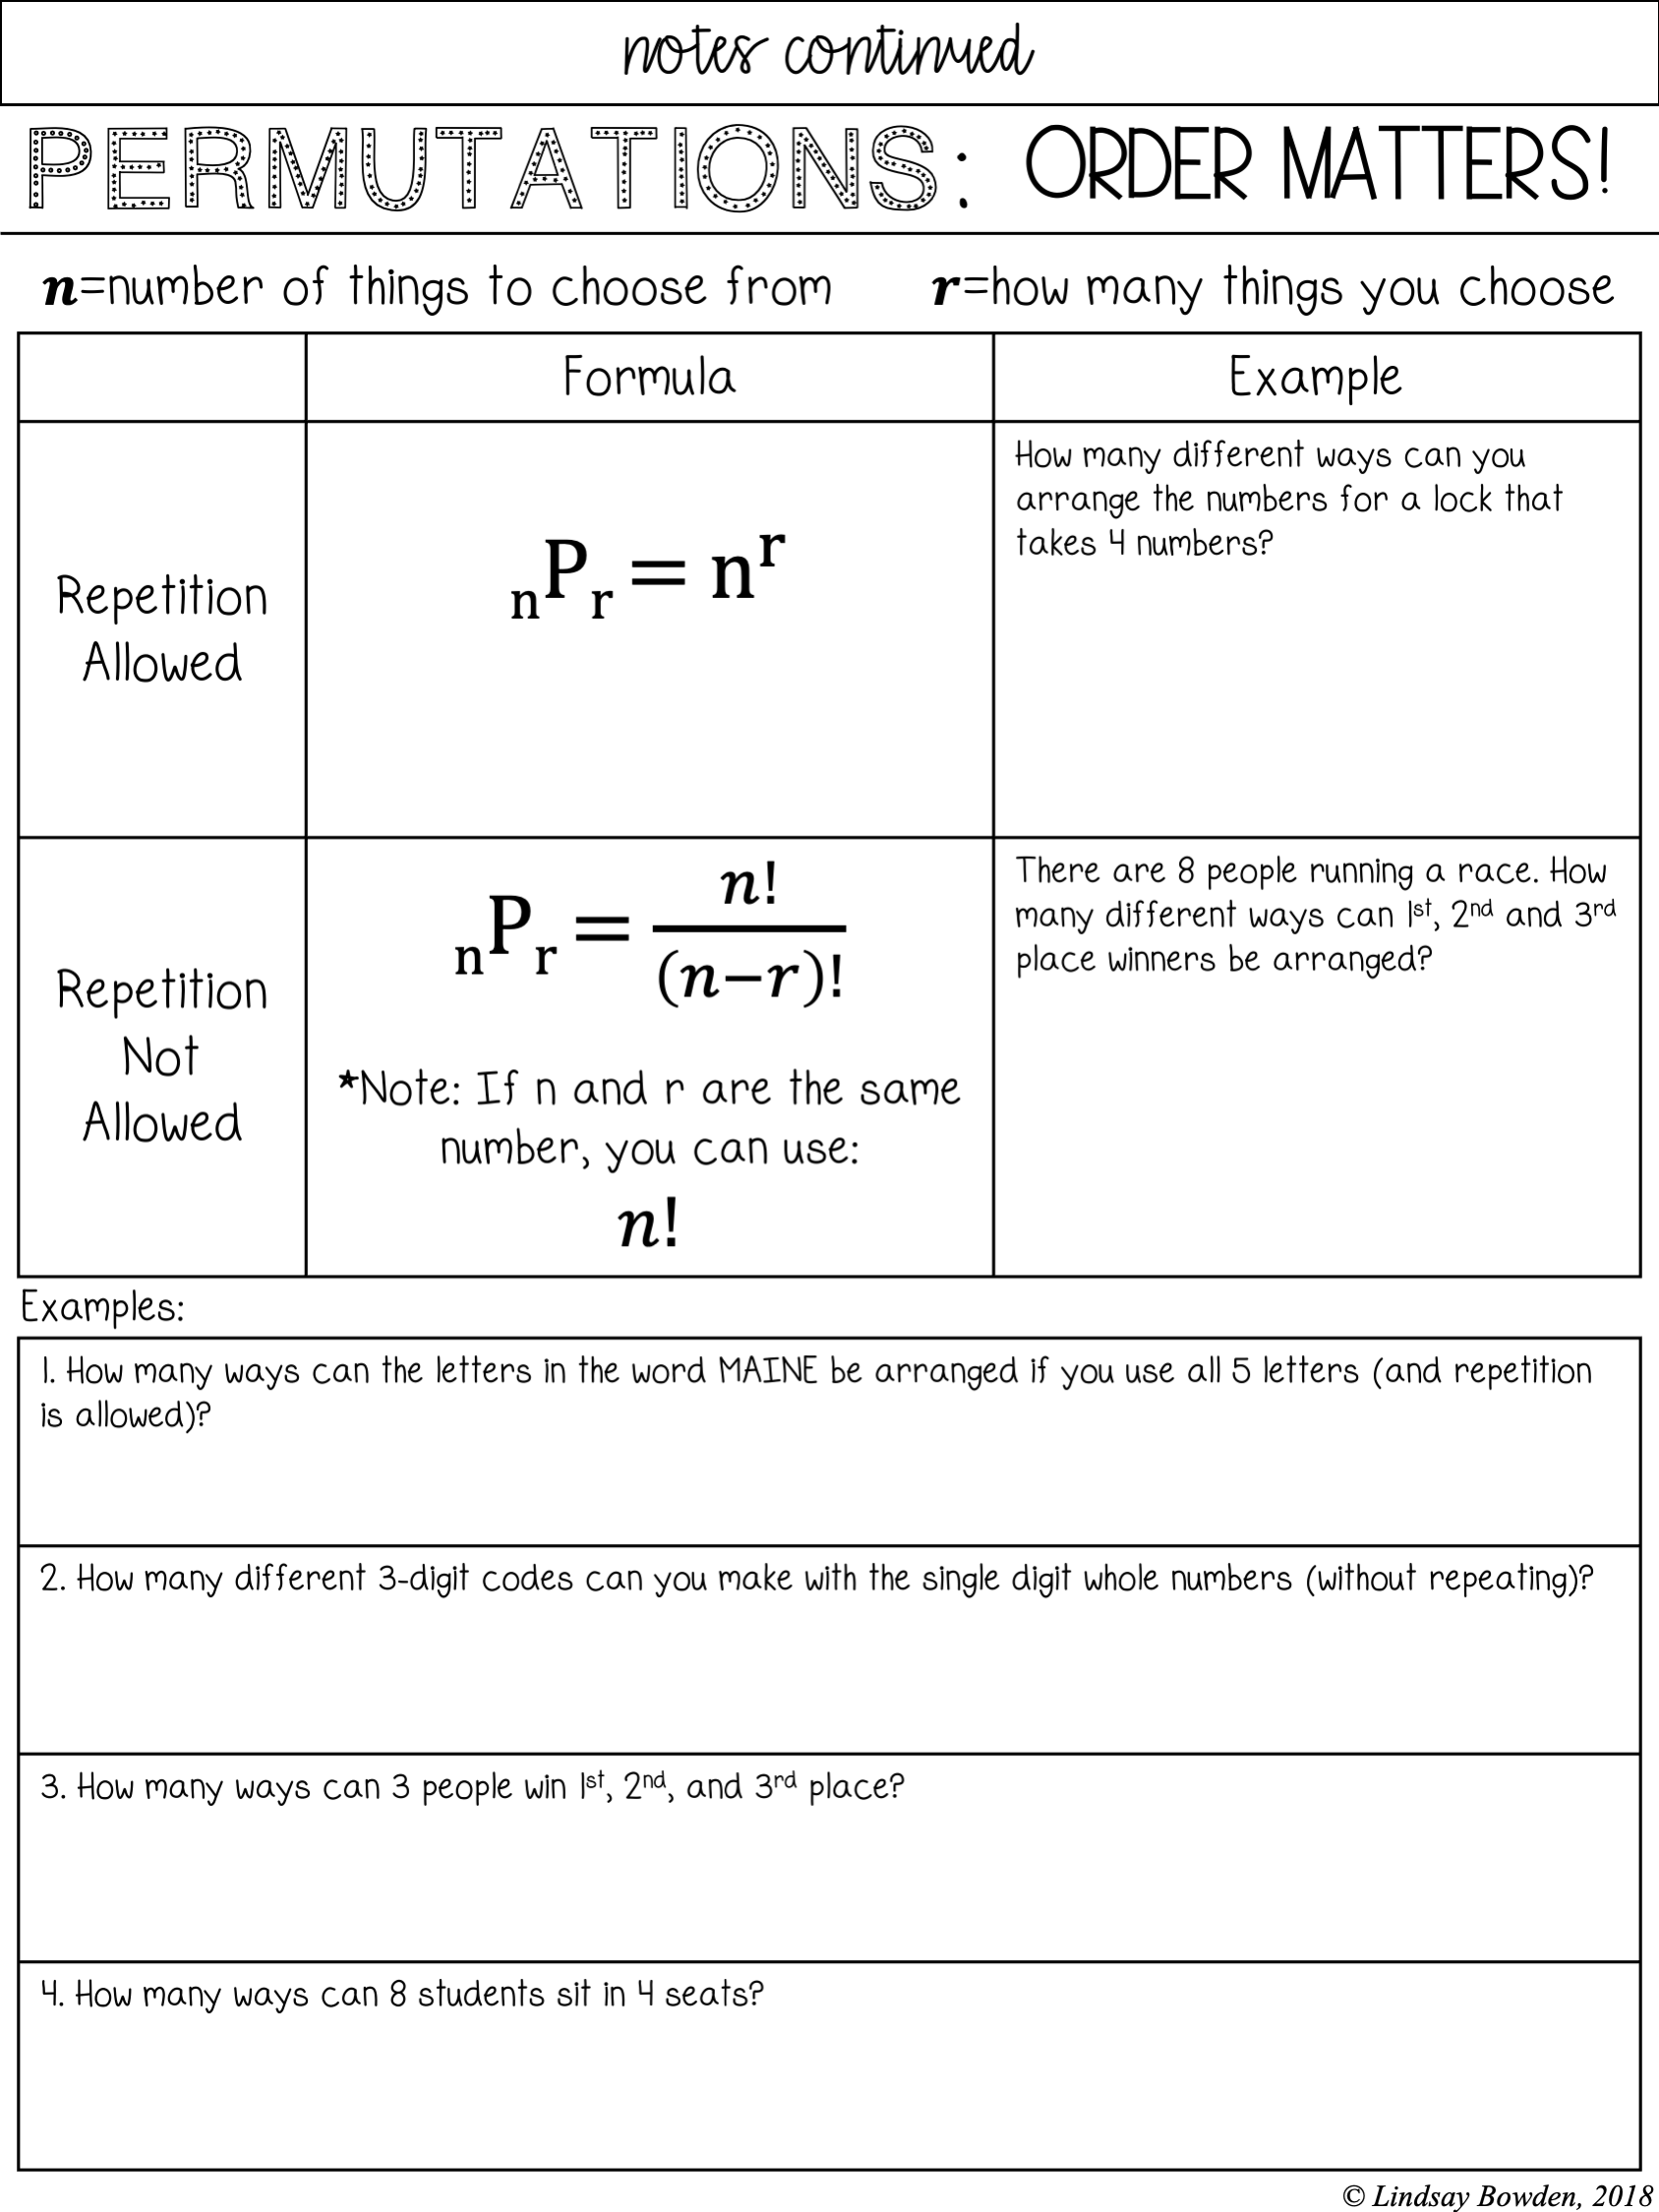 Permutations and Combinations Notes and Worksheets - Lindsay Bowden Intended For Permutations And Combinations Worksheet